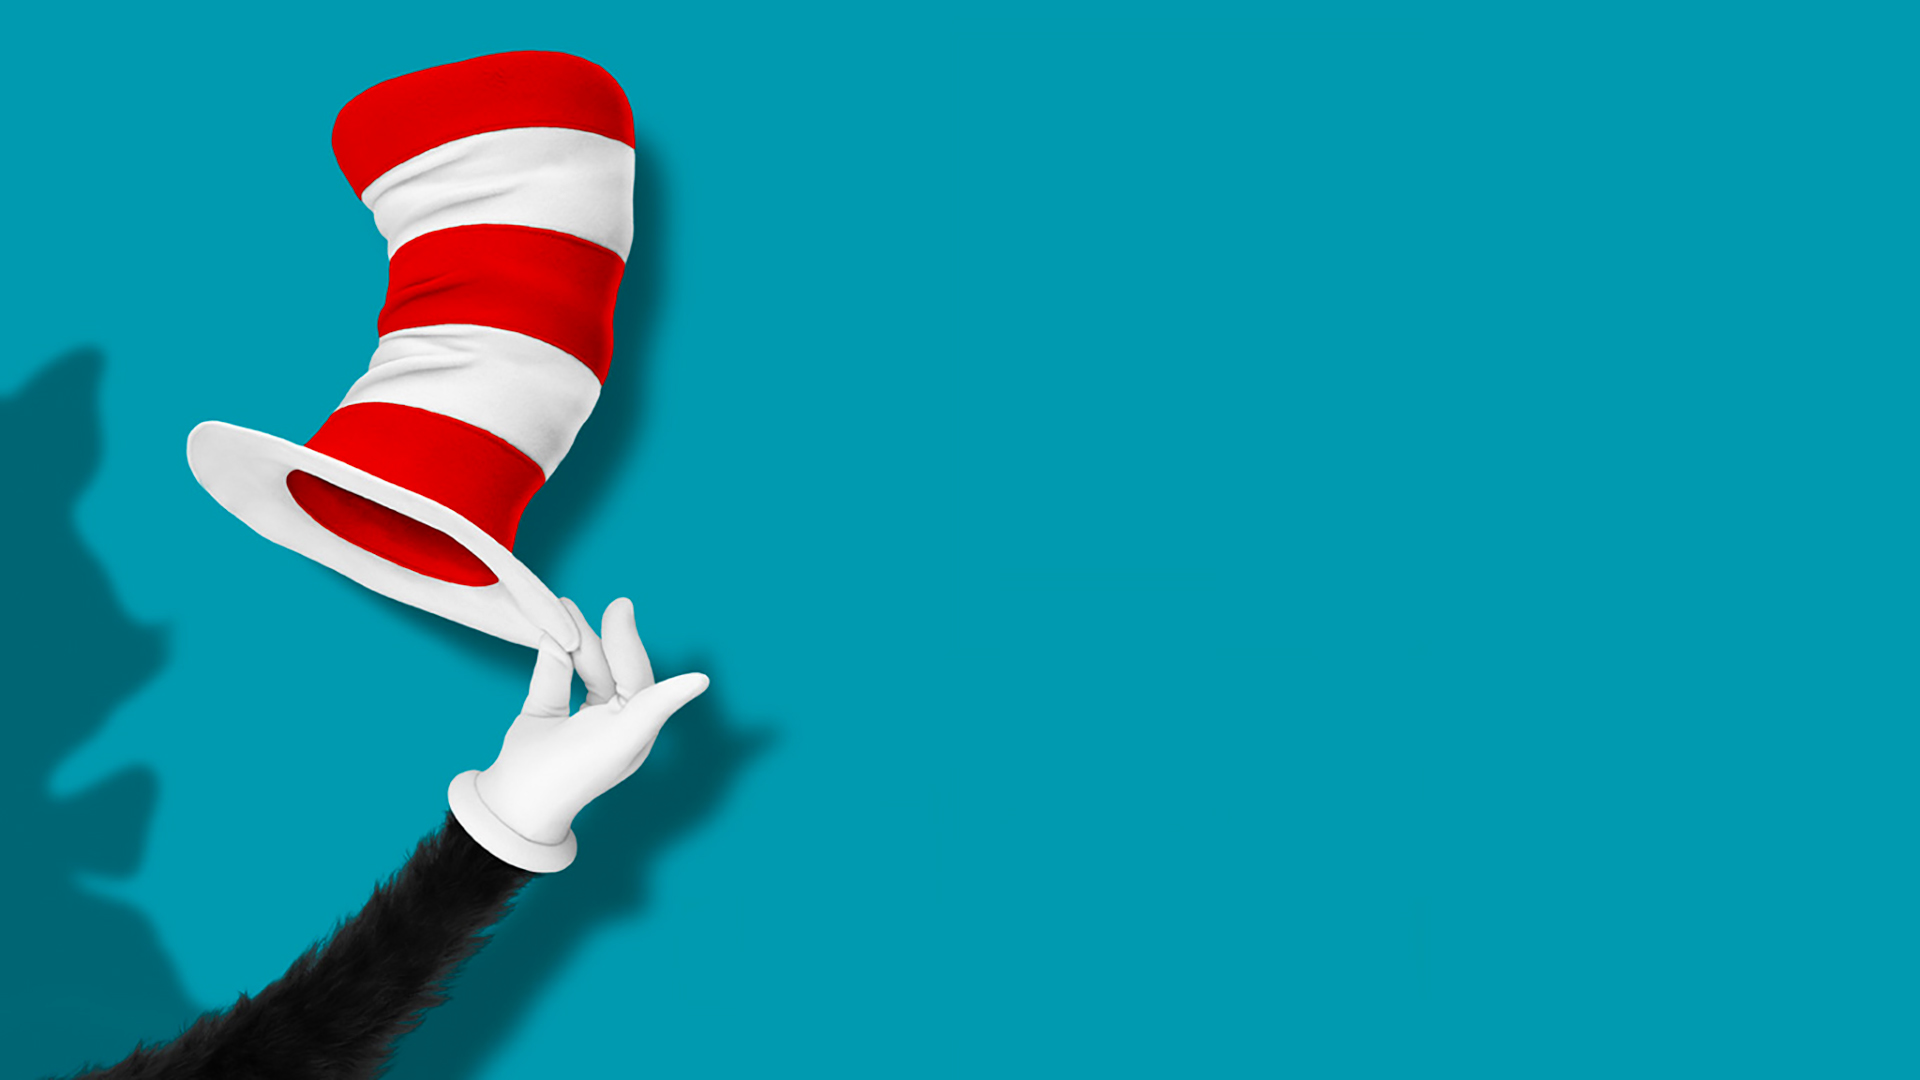 movie, dr seuss' the cat in the hat